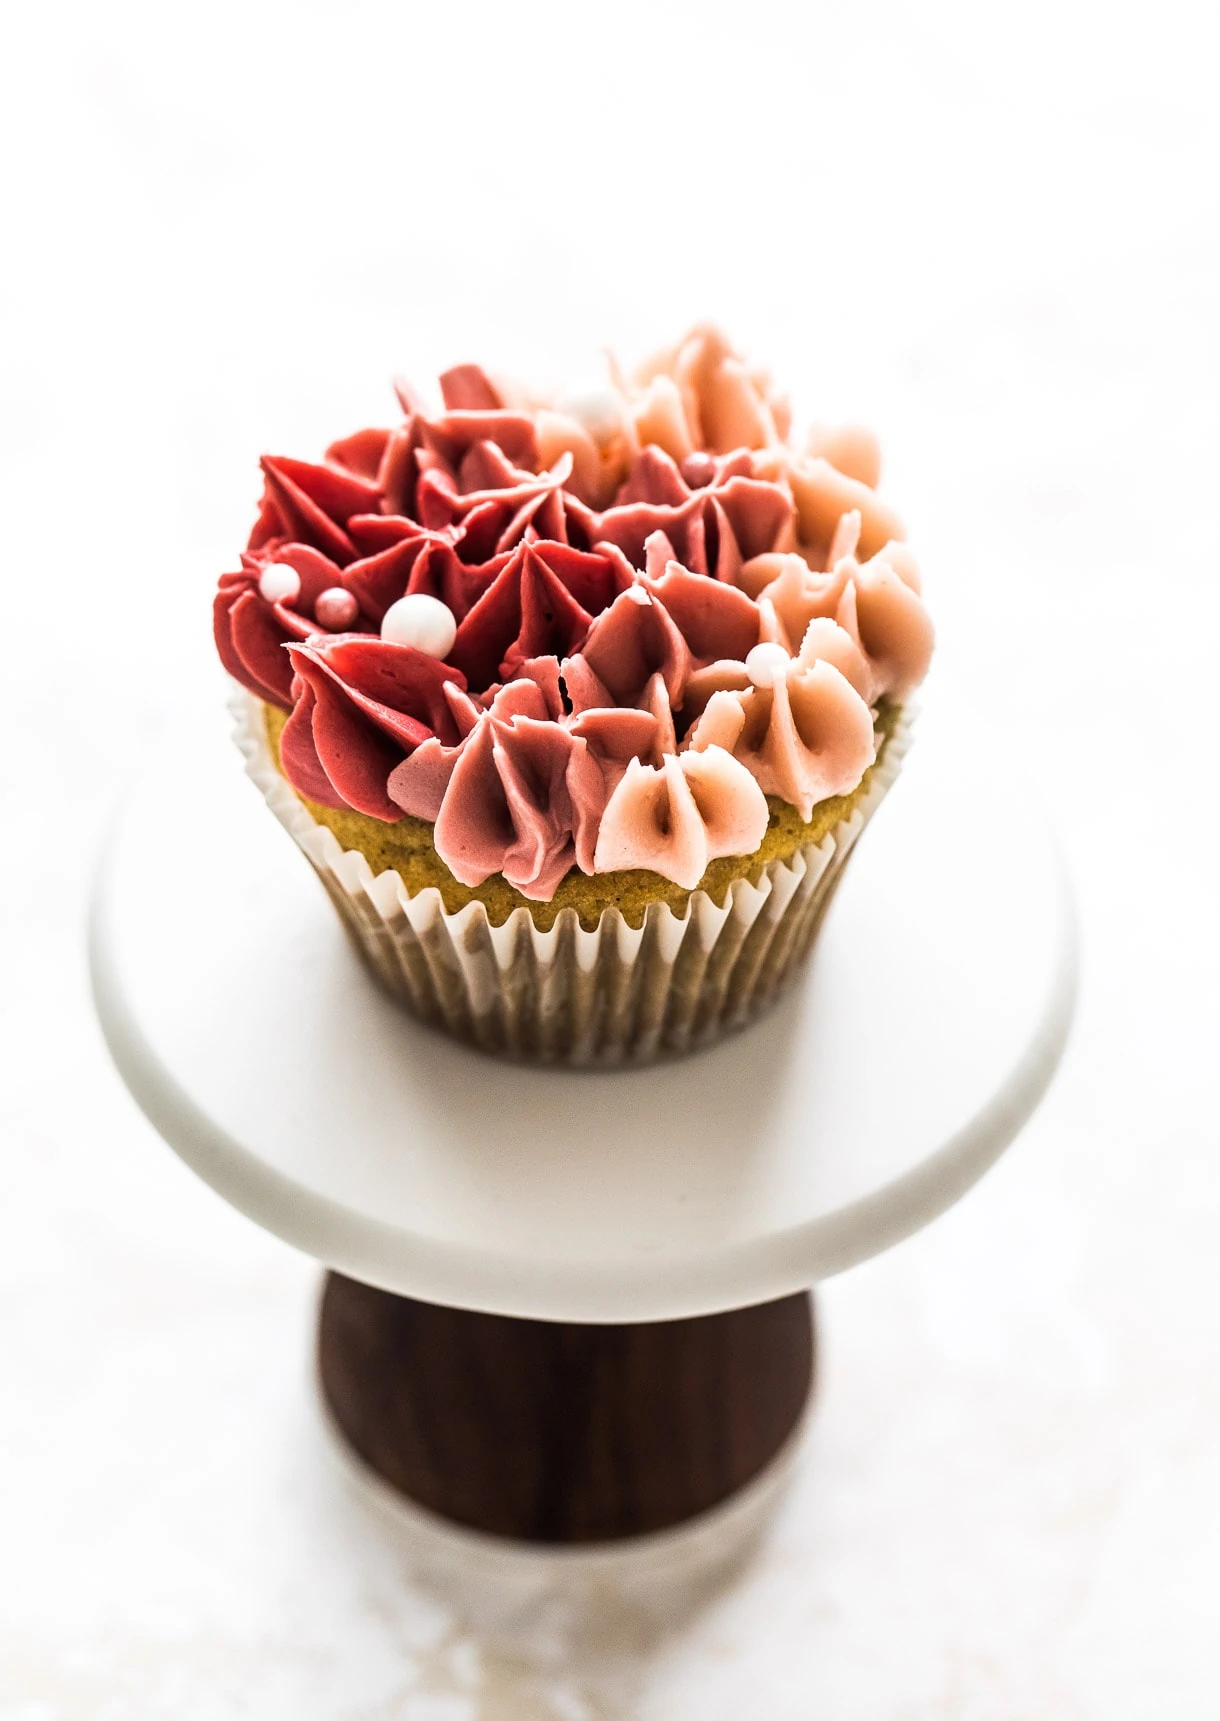 Beautiful rose colored cupcakes on a cupcake stand